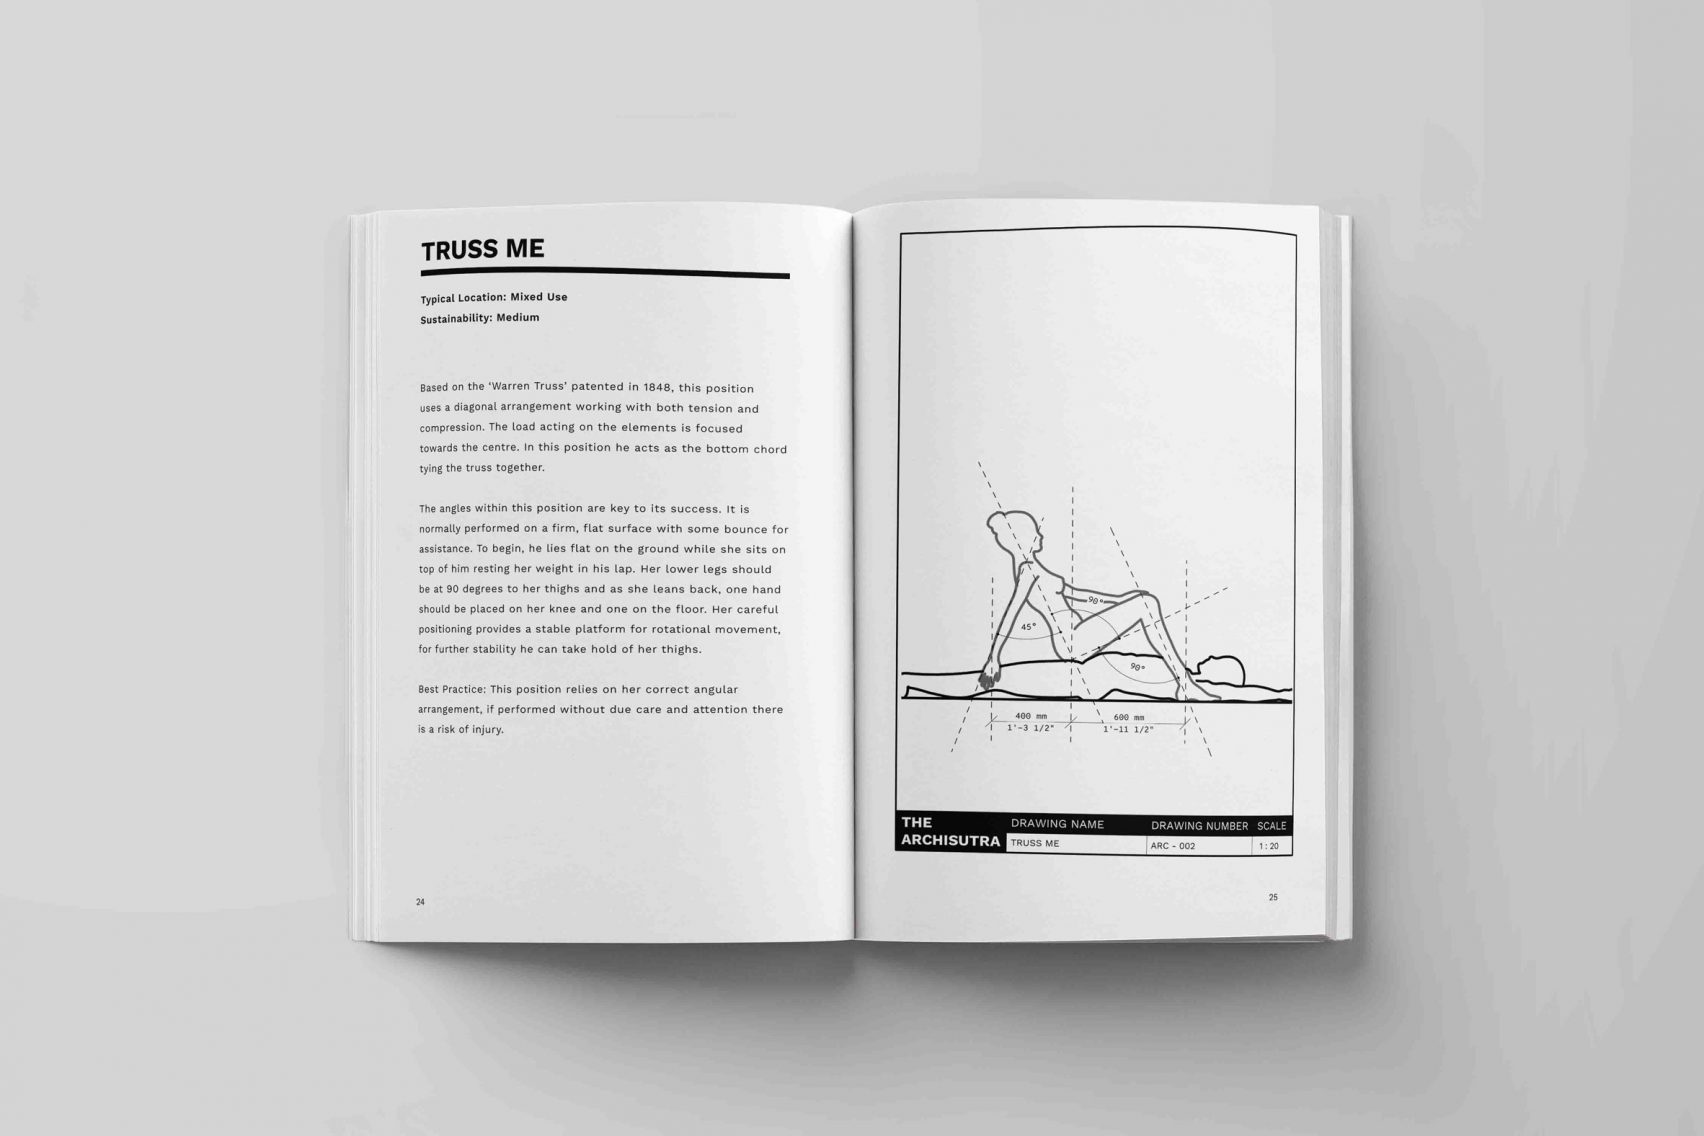 Archisutra Manual Teaches Architecture And Design Inspired